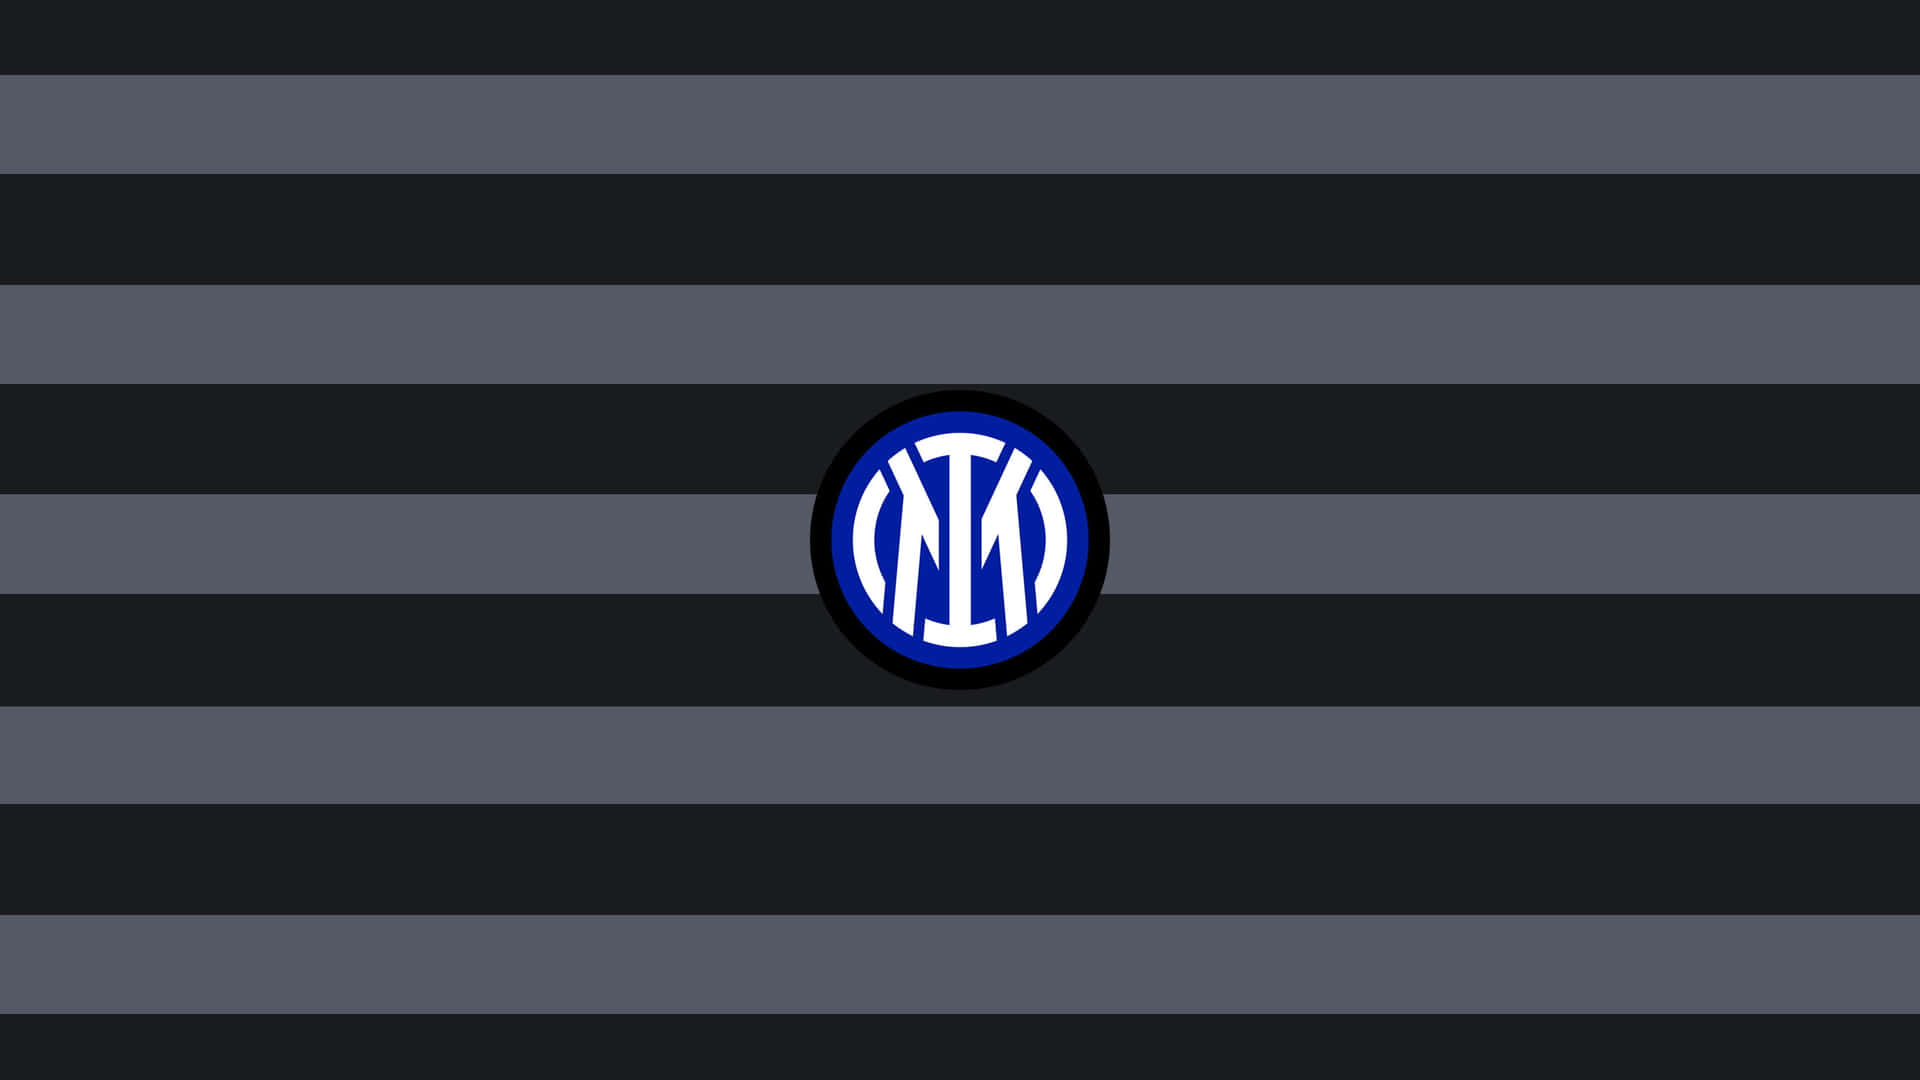 Players Of Inter Milan Celebrating A Victory Wallpaper